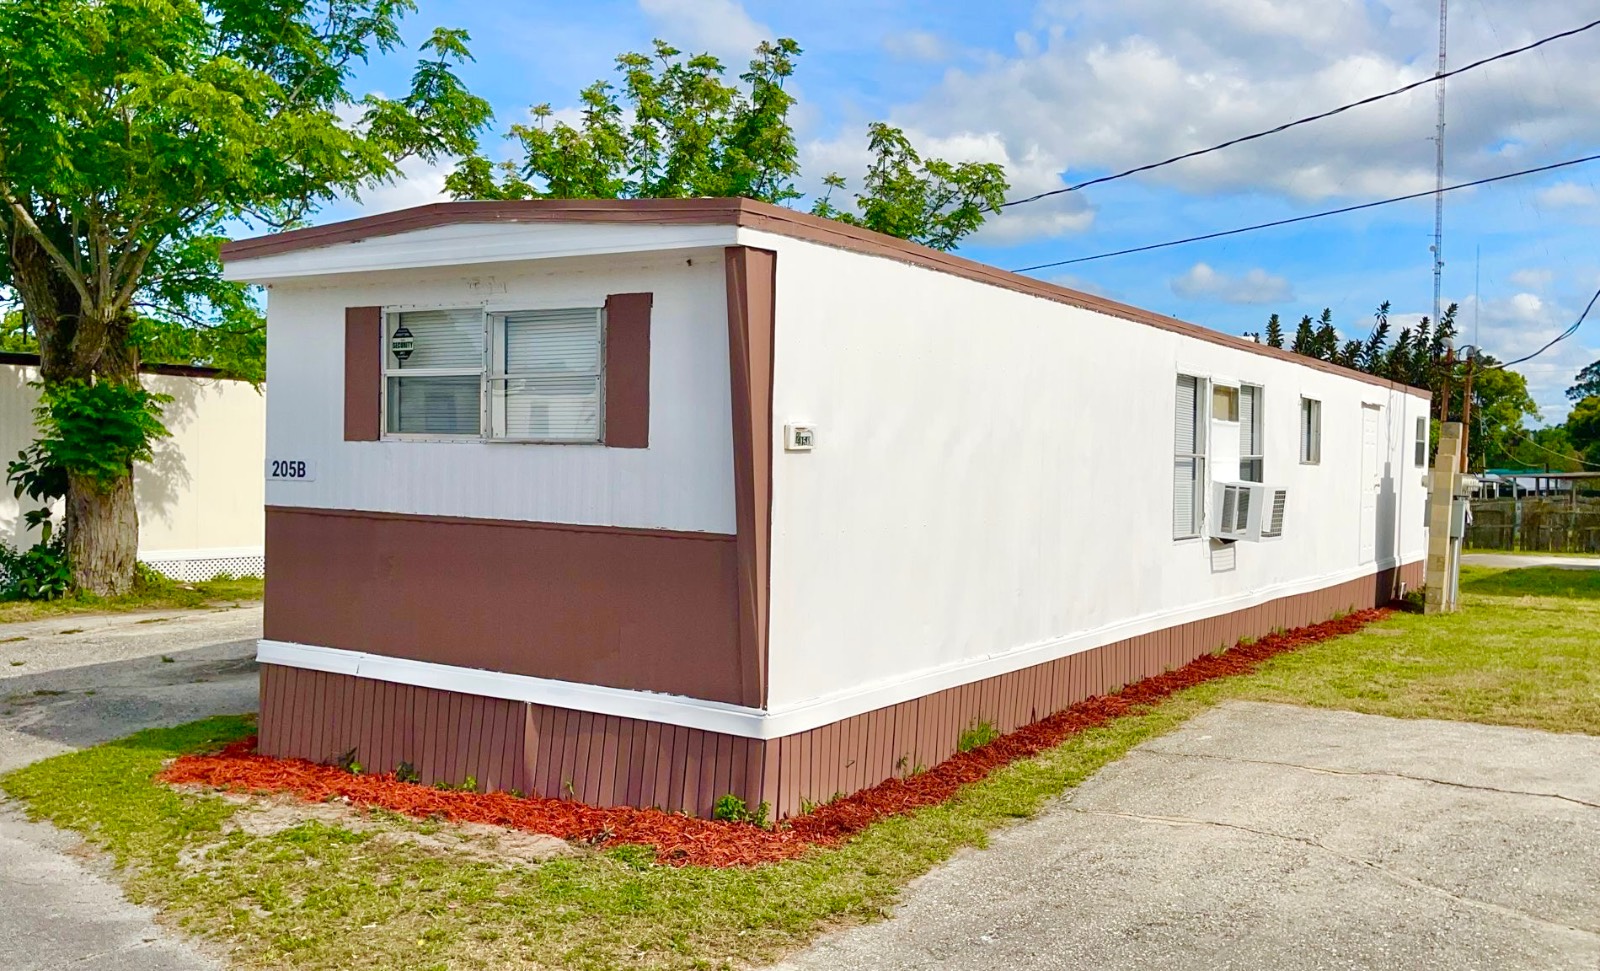 This Recently Updated 2 bedroom, 1 bath mobile home is Located In Cocoa Estates , an all-age community that offer a lot rent of only $575 a month and welcomes pets under 35 lbs (Breed Restrictions Apply) . Located off Clear lake Rd In Cocoa Fl.   Convenience is at your fingertips with this prime location. Enjoy easy access to dining, shopping, major highway and the bus stop is just moments away. Plus, Cocoa Beach is just a short 15-minute drive, perfect for those wanting to soak up the sun and sand. Downtown Cocoa Village is a short drive away .      There is off-street parking for two vehicles, ensuring your convenience and security. The property also boasts a garden area complete with temporary fencing and a metal shed, perfect for those with a green thumb or in need of extra storage.       The entire home features all-new drywall, giving it a sleek and polished look. The new cabinets and counter tops in the kitchen add a touch of elegance, while the new carpeting in the bedrooms and new vinyl flooring throughout make cleaning a breeze.       The bathroom has been tastefully updated, ensuring a spa-like experience every time you step inside. With ample space and an open floor plan, this home feels incredibly spacious and inviting. The split family floor plan offers privacy, allowing everyone to have their own personal space.